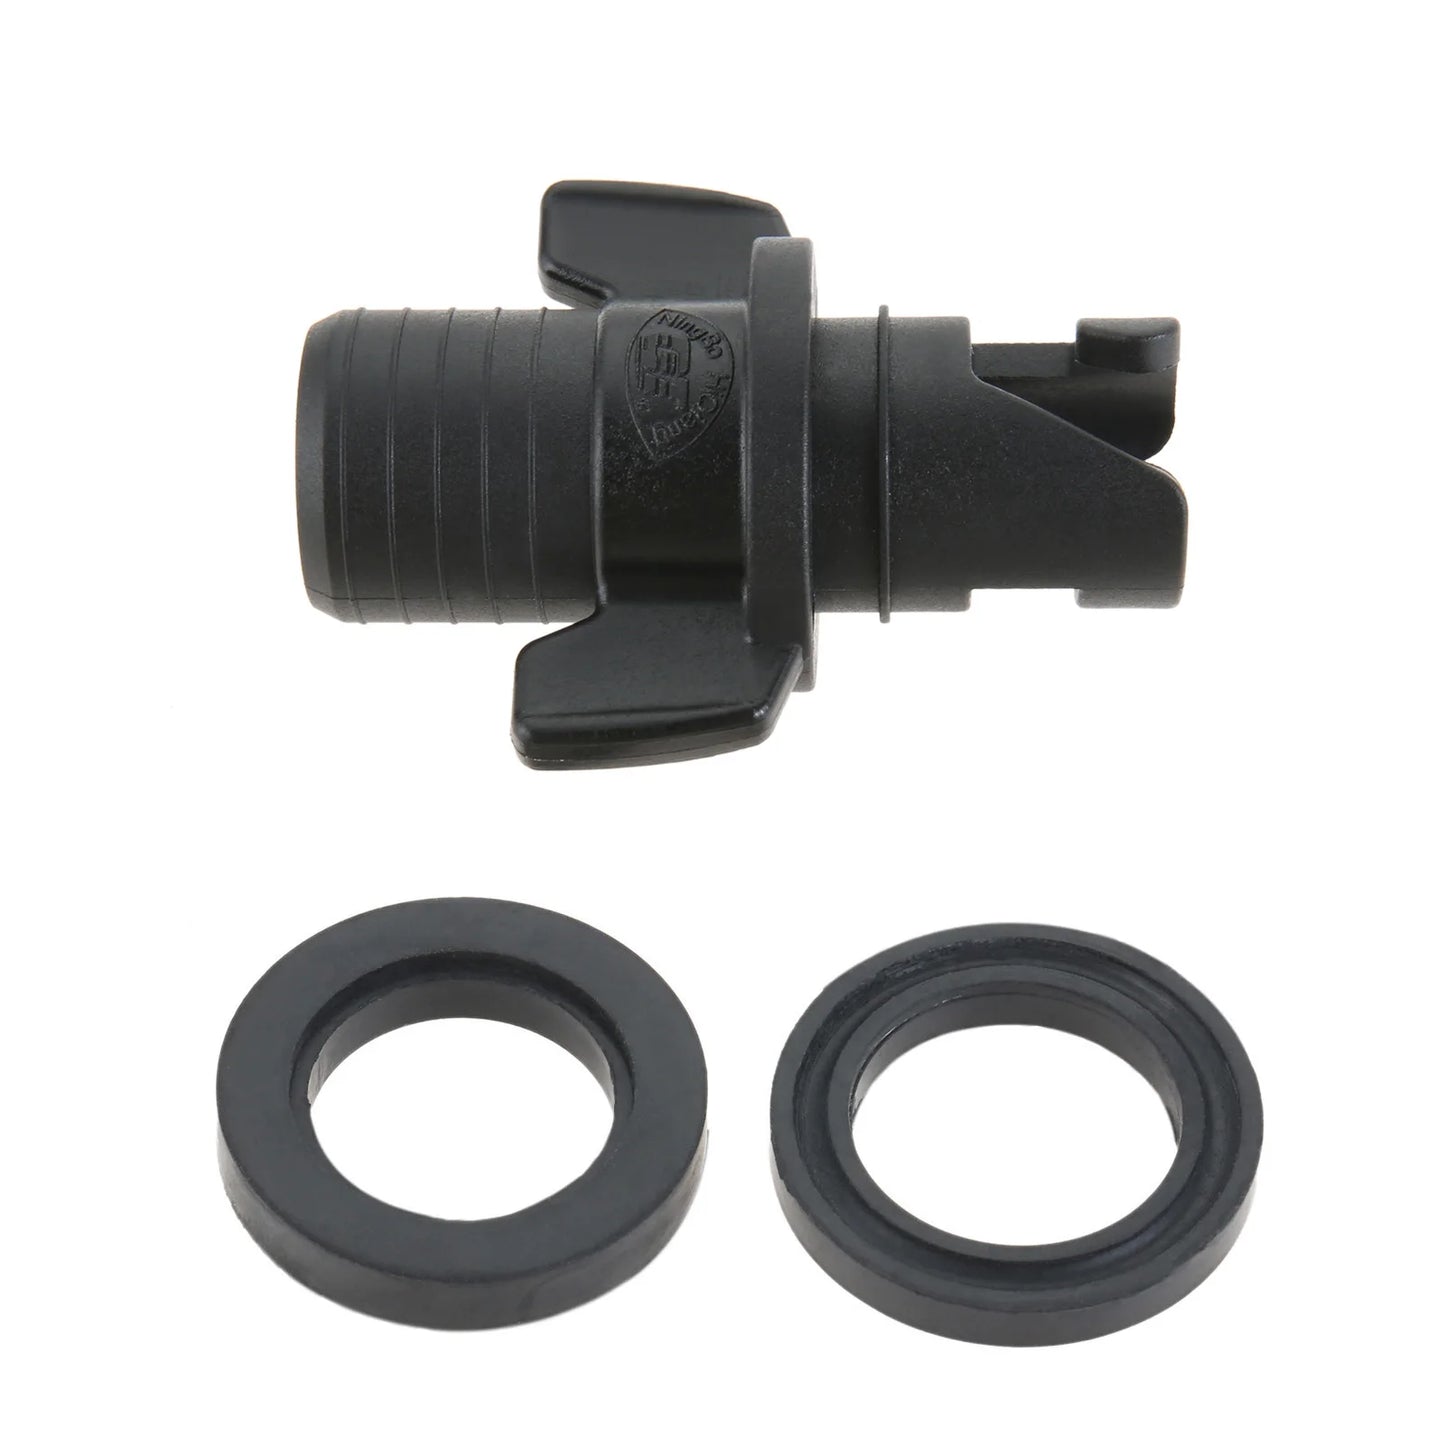 1pc Inflation Pump Air Hose Adapter Connector Air Valve Inflation Device For Inflatable Boat Paddle Sup Board 6/8-hole Air Valve